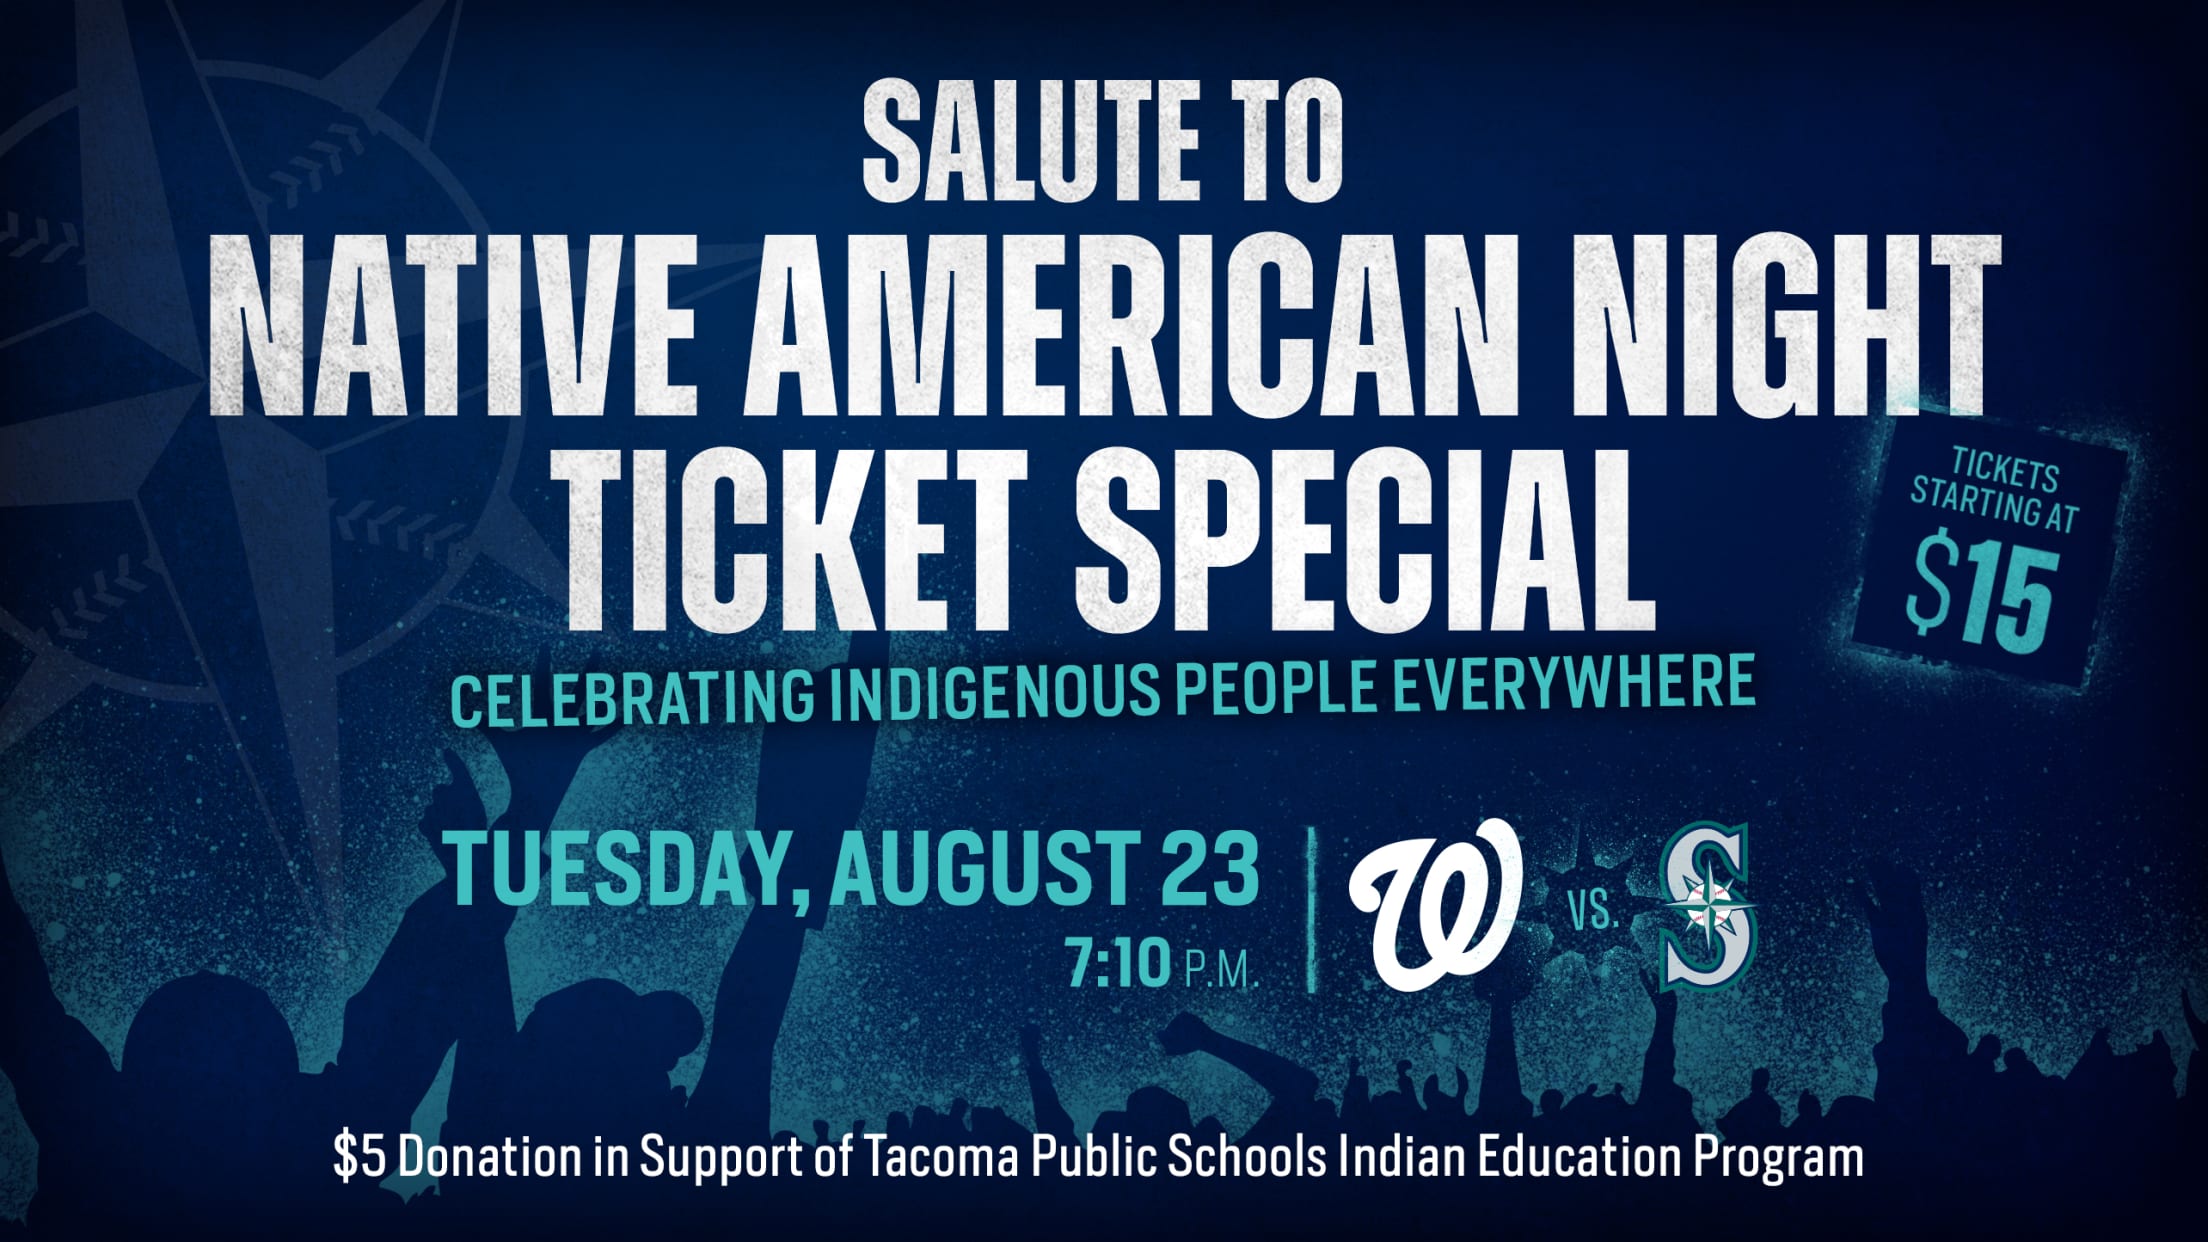 Salute to Native American Night Seattle Mariners